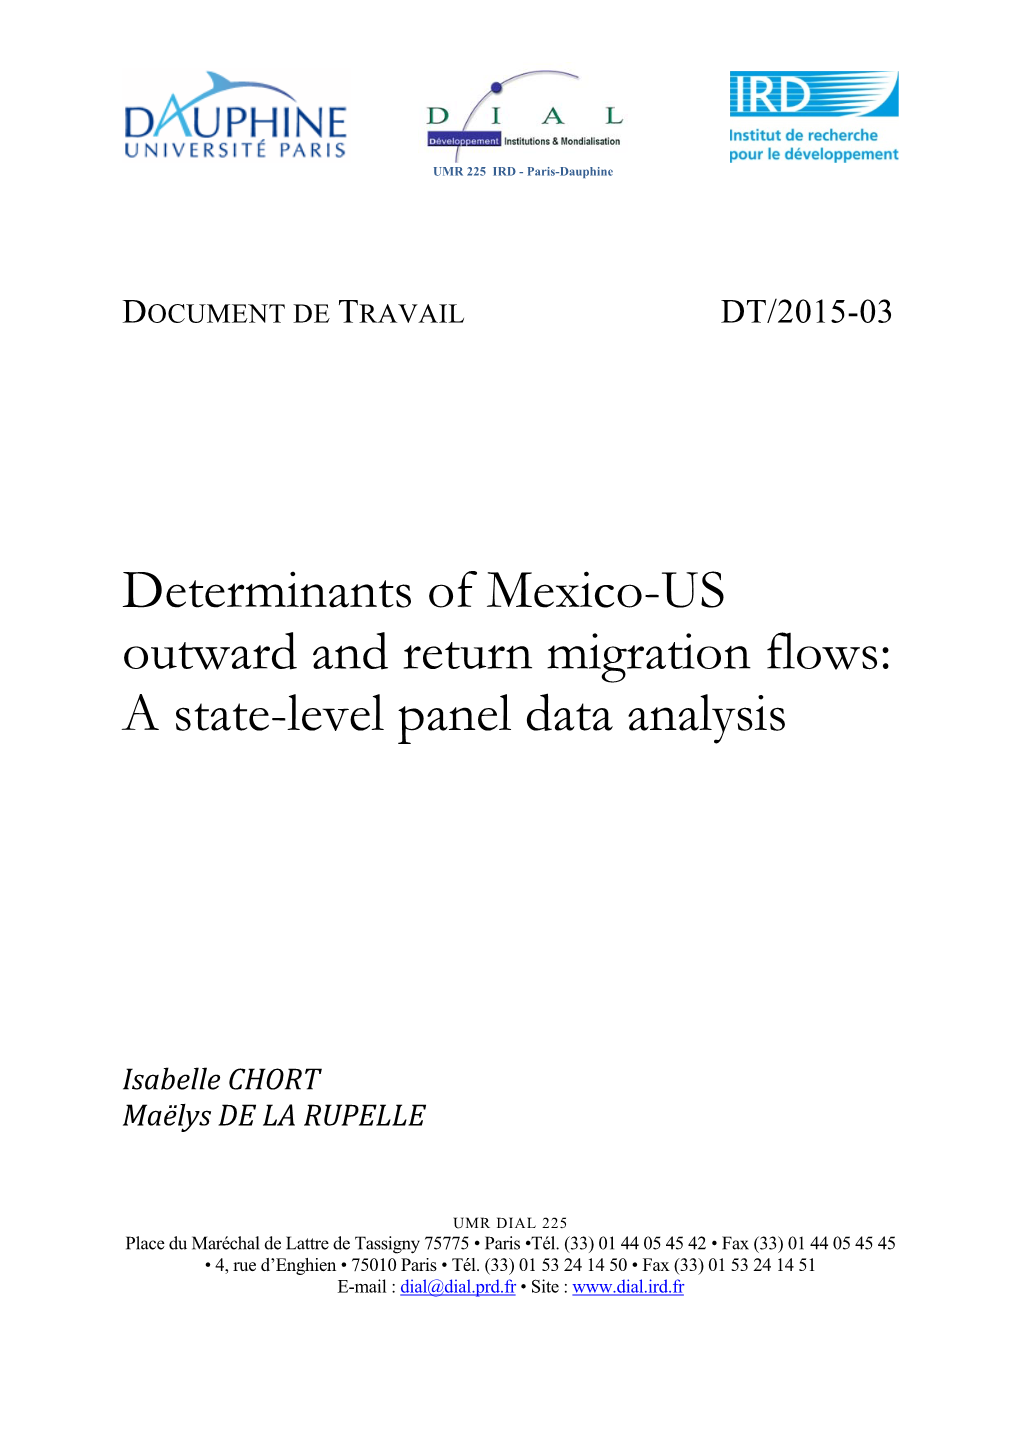 Determinants of Mexico-US Outward and Return Migration Flows